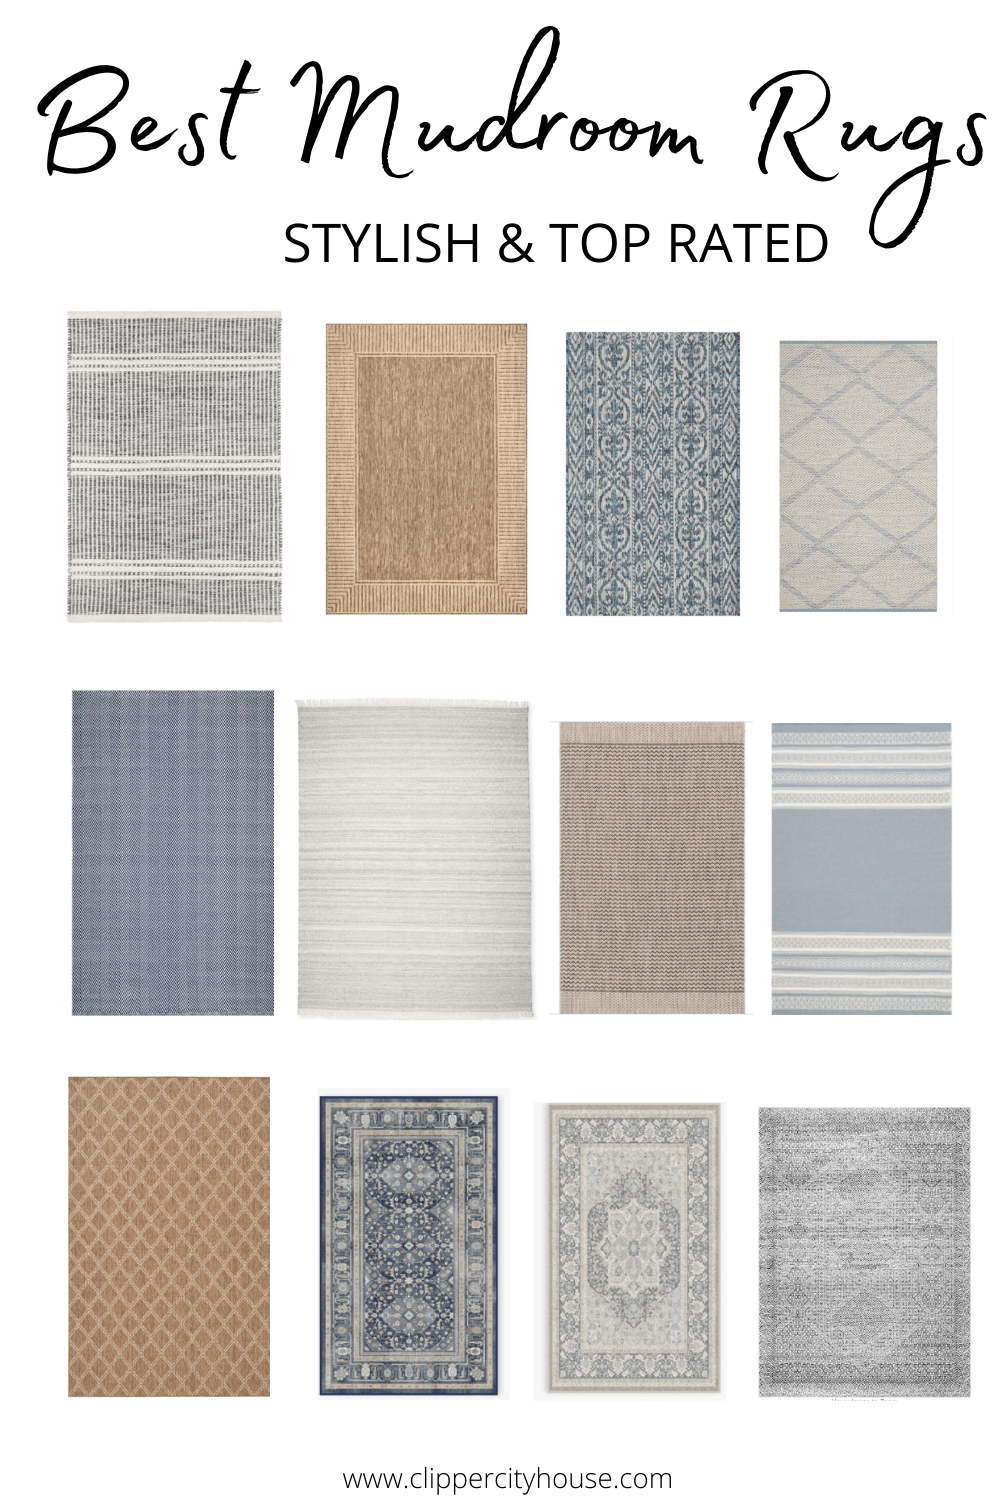 https://clippercityhouse.com/wp-content/uploads/2021/08/Best-Rugs-for-Mudroom.png